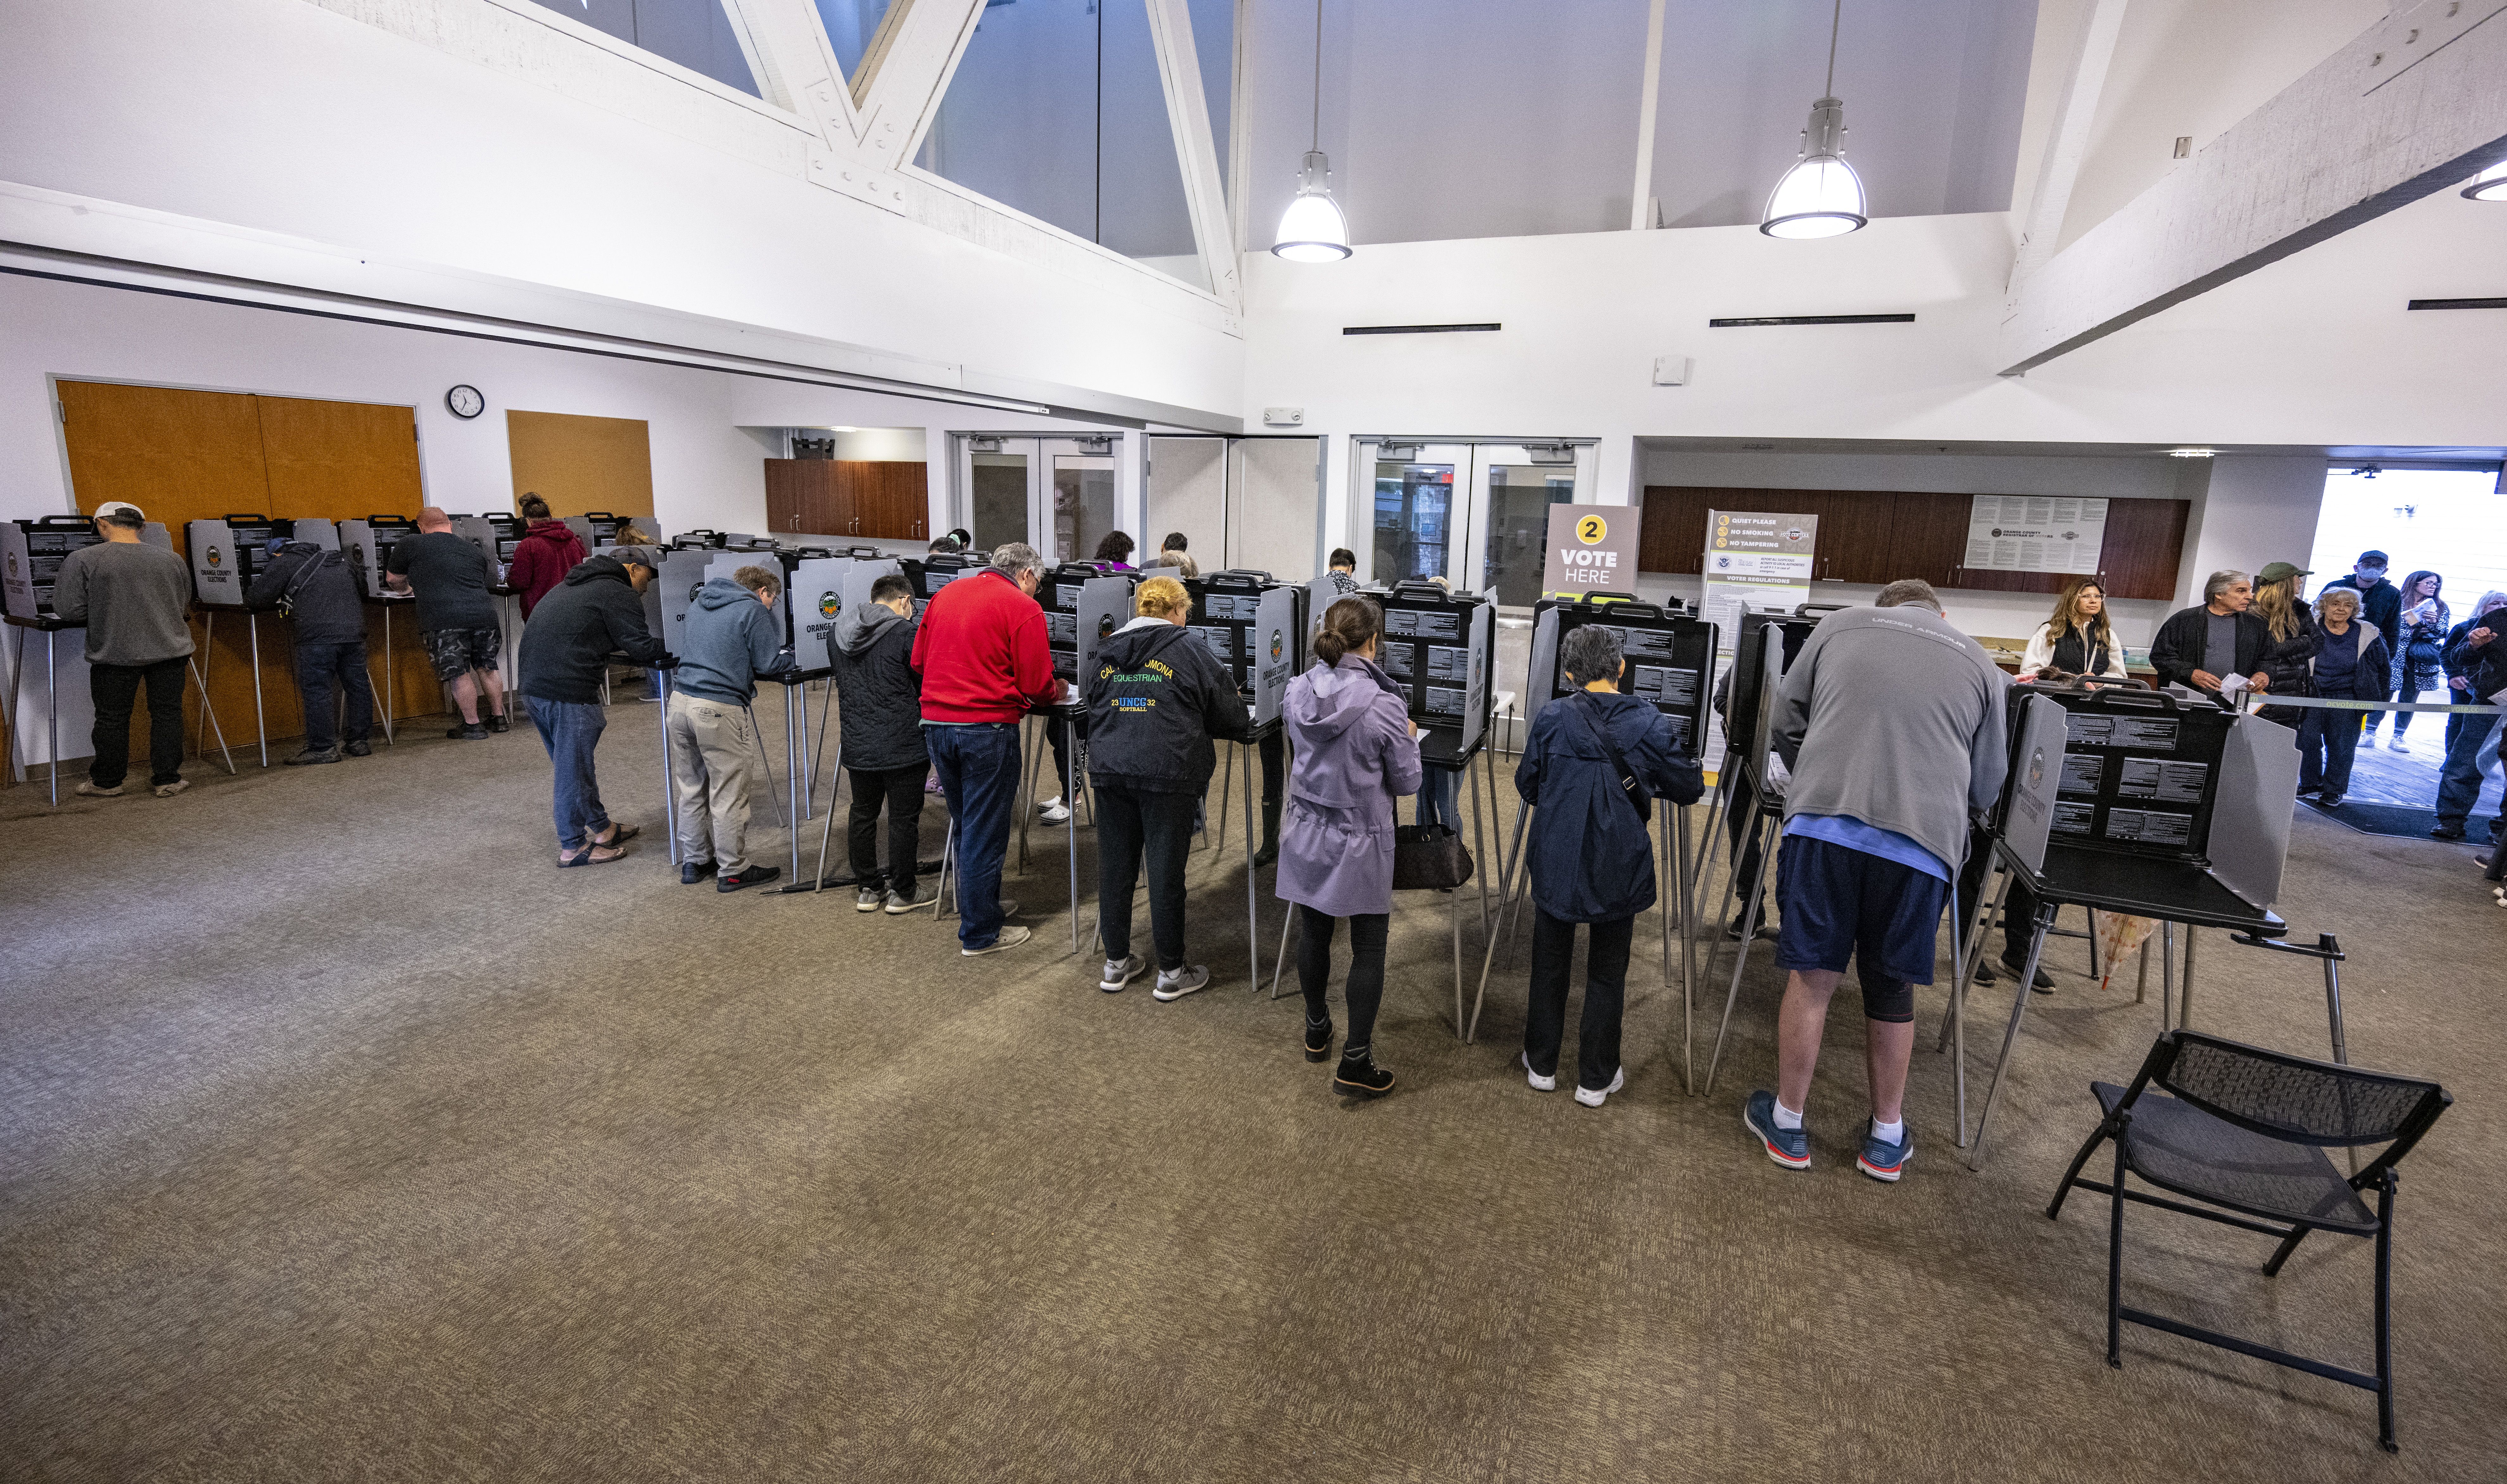 With a line out the door, every station was filled with voters as they cast their ballots late morning for the midterm election.